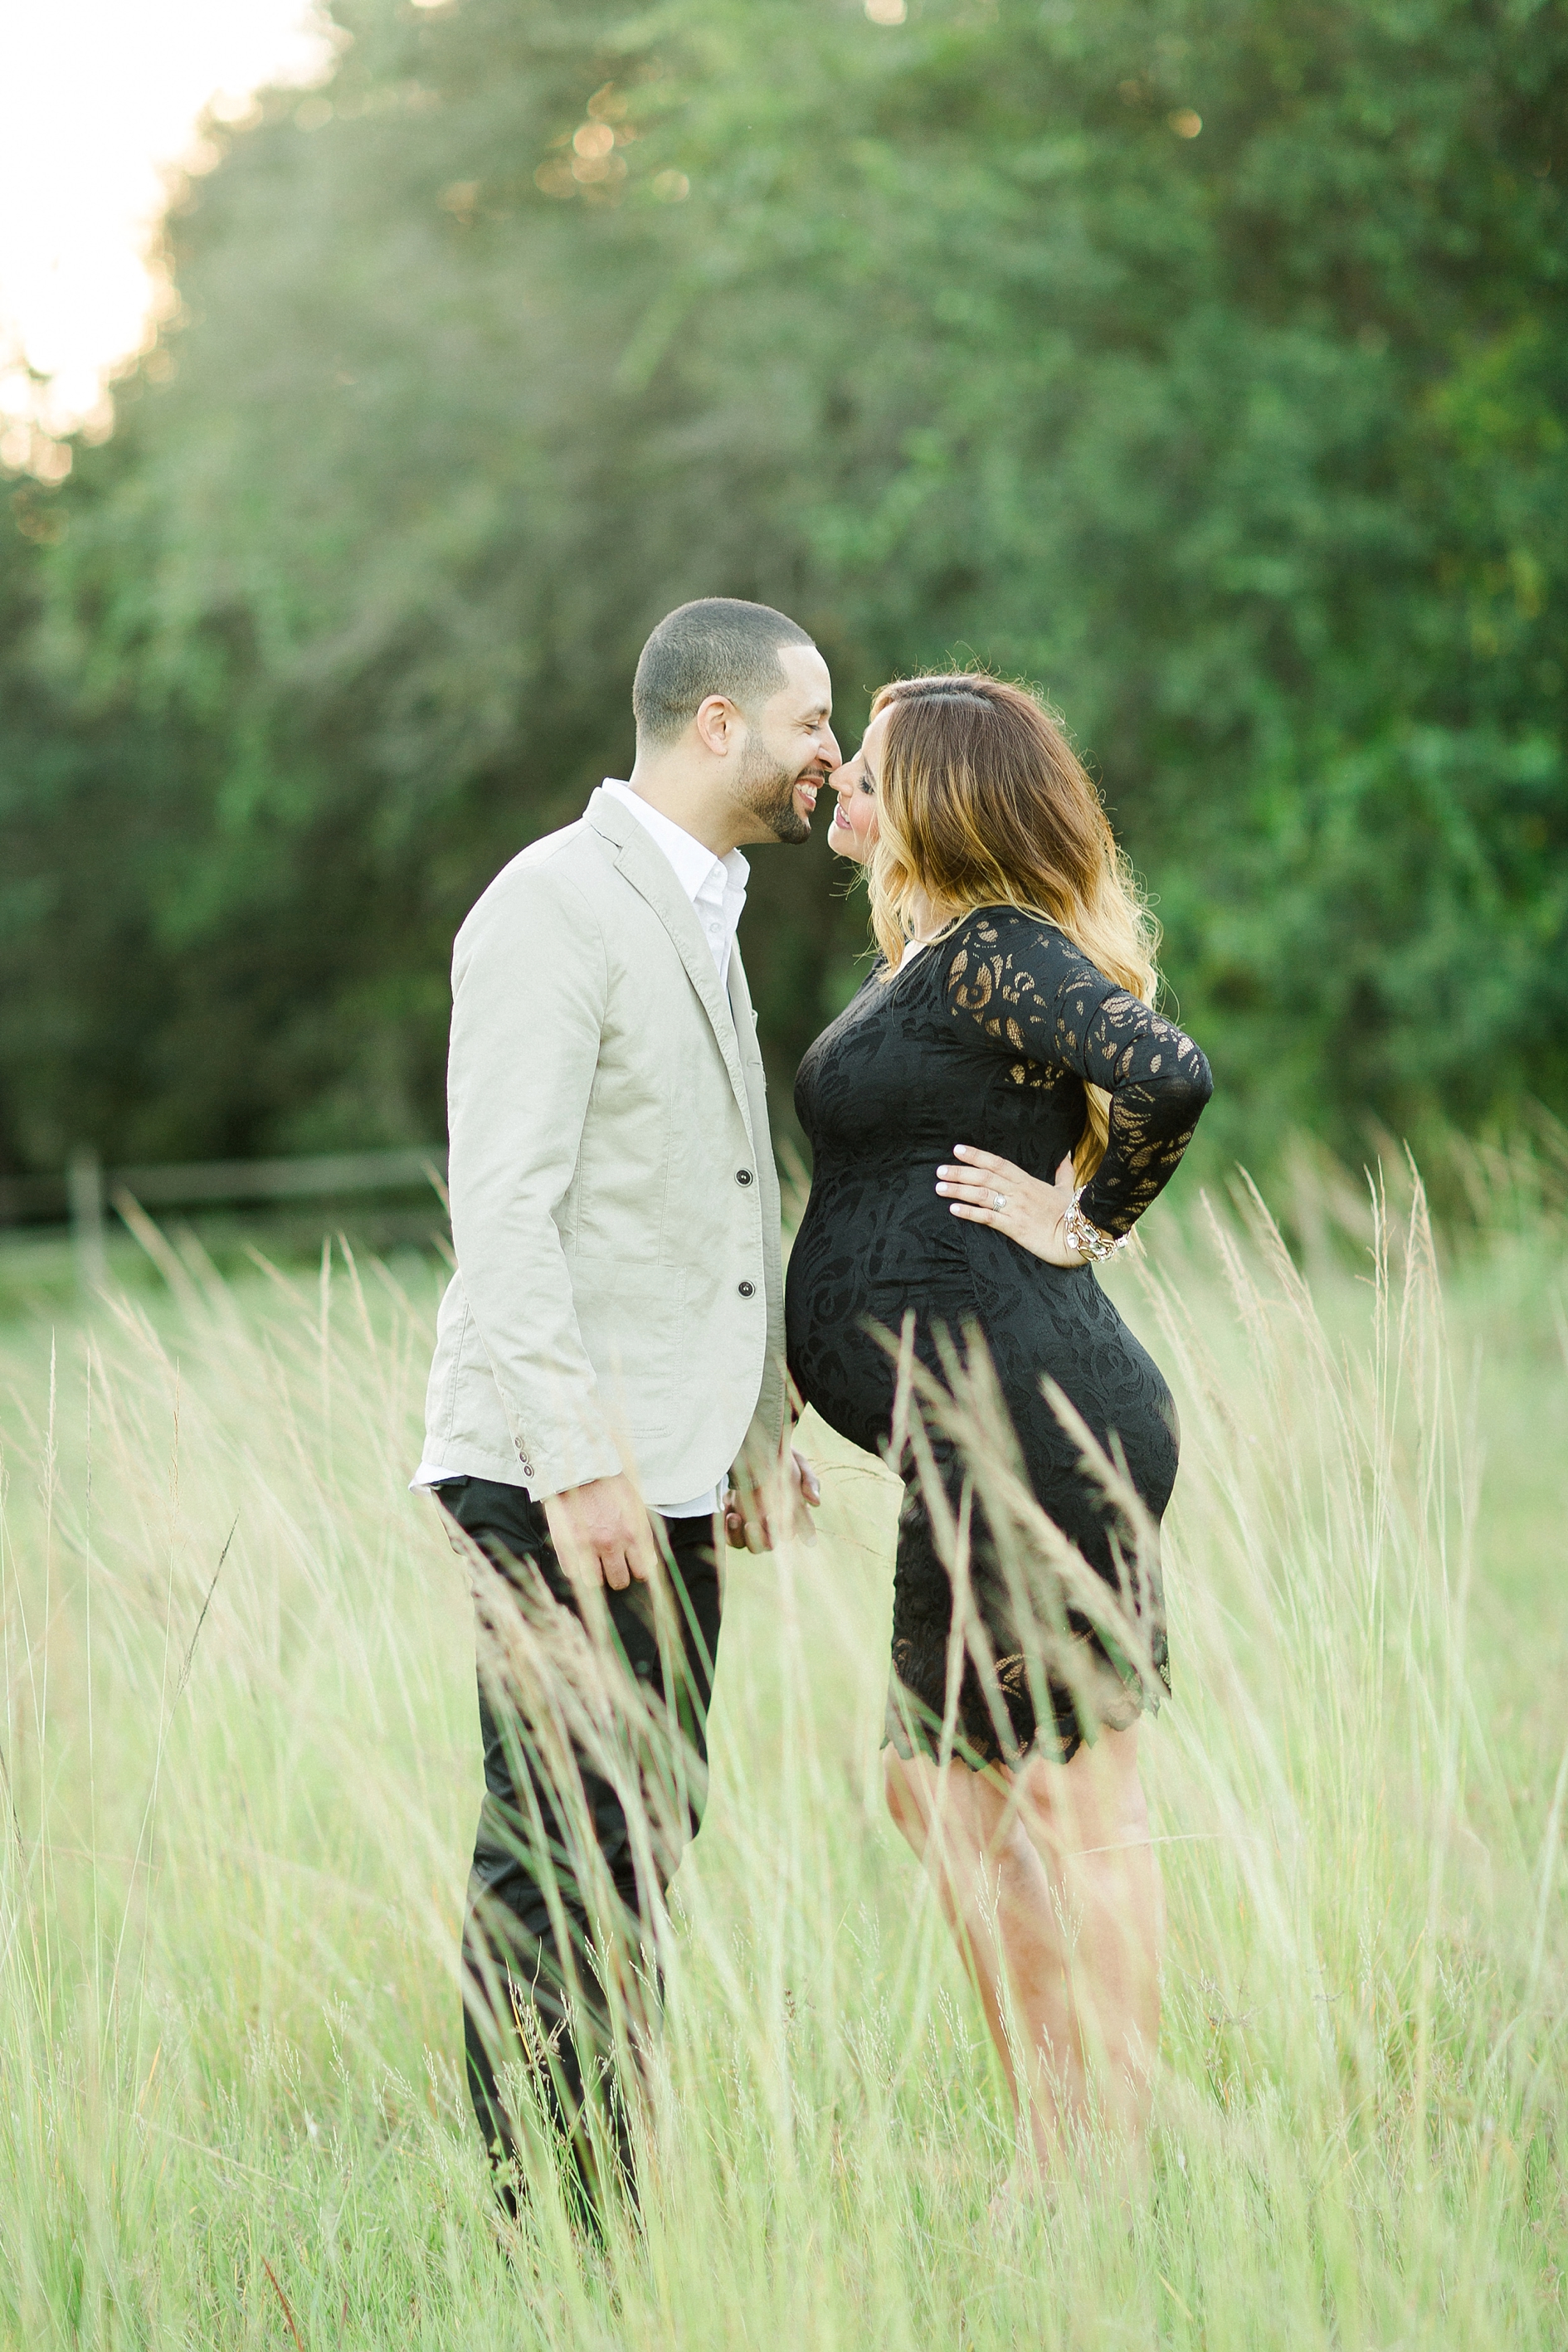 Tampa Maternity | © Ailyn La Torre Photography 2015